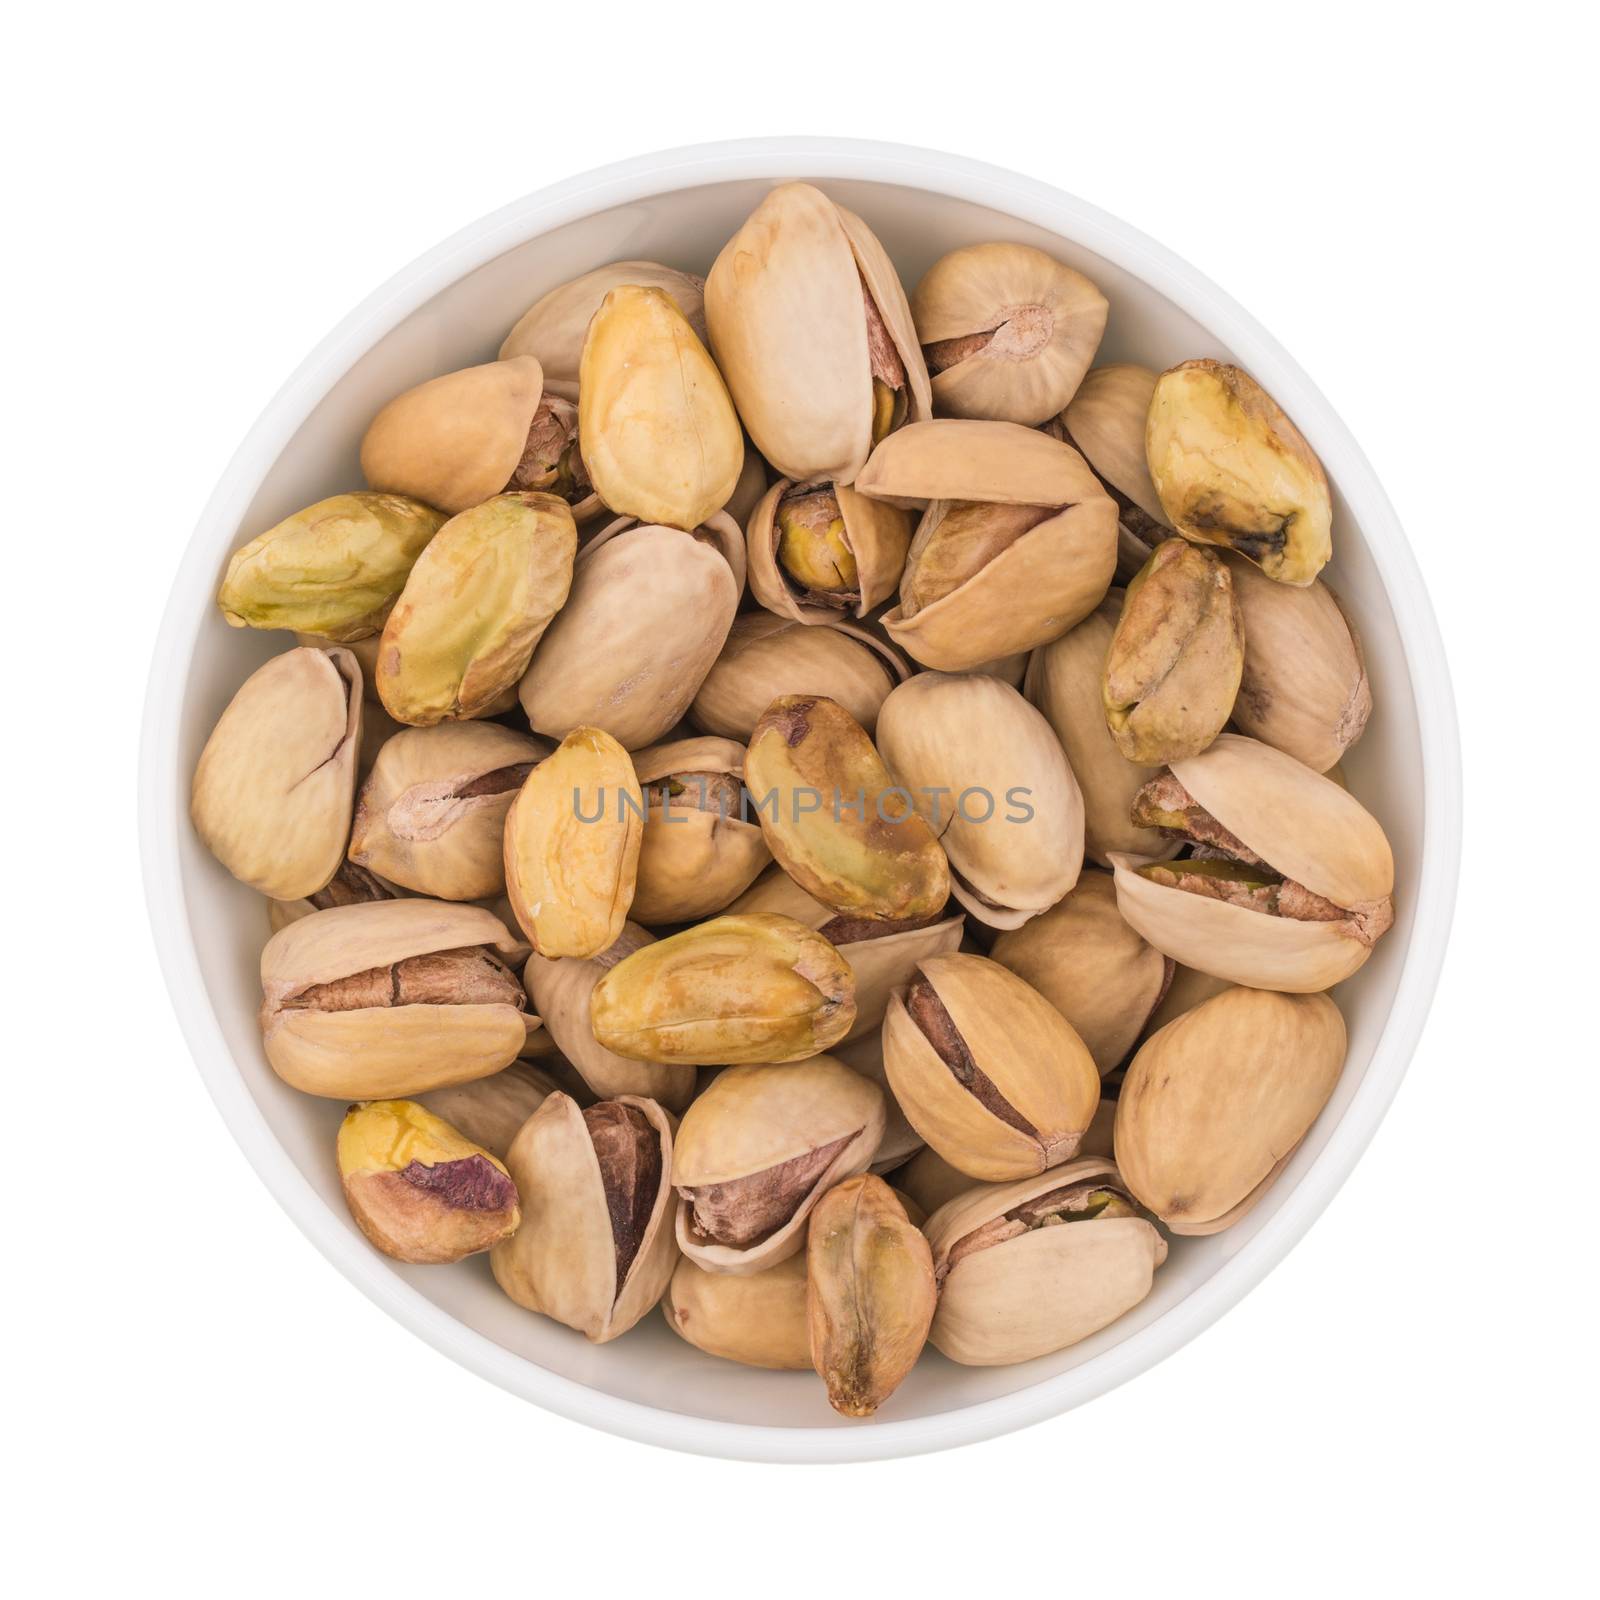 At the center of the frame white bowl with pistachio nuts on a white background. Salted roasted pistachios. Close. Horizontal shot. Top view.